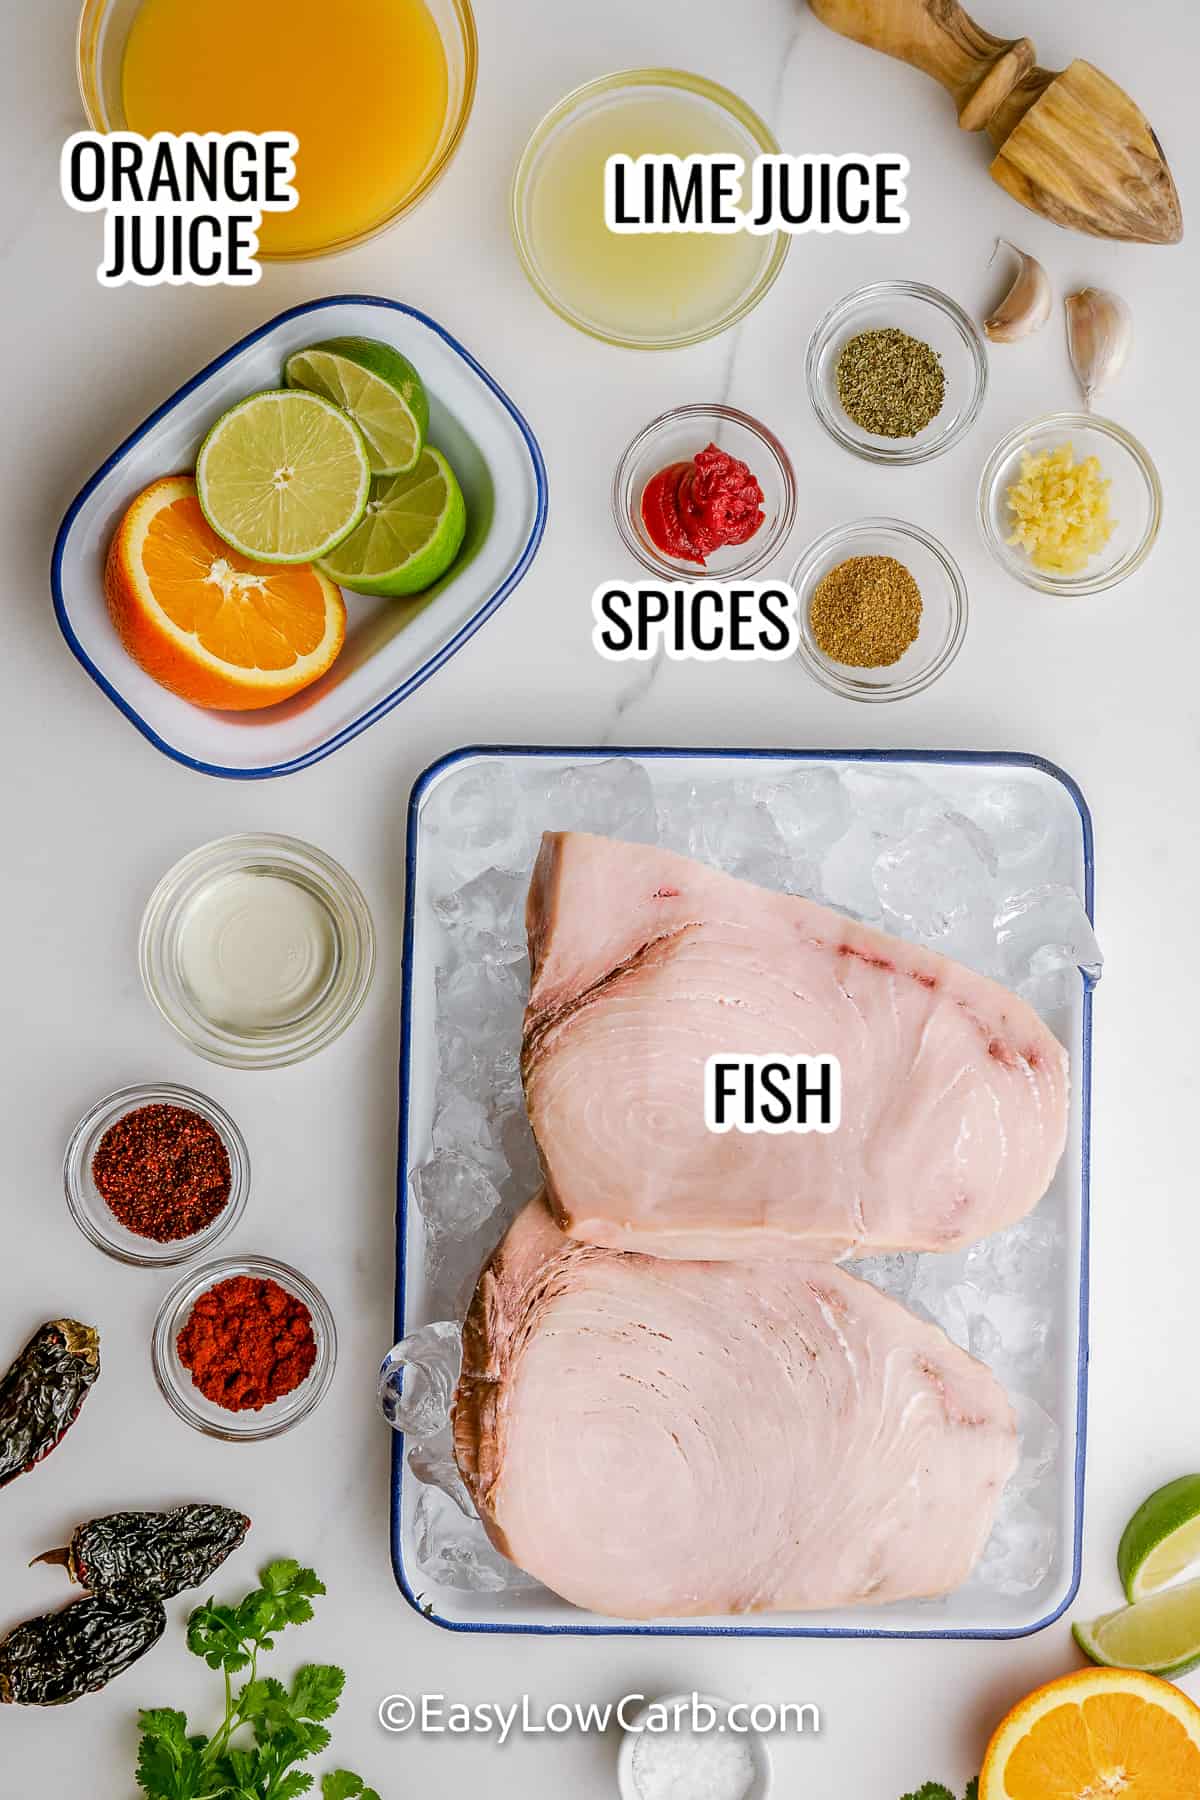 ingredients assembled to make grilled fish tacos, including fish, spices, lime juice, and orange juice